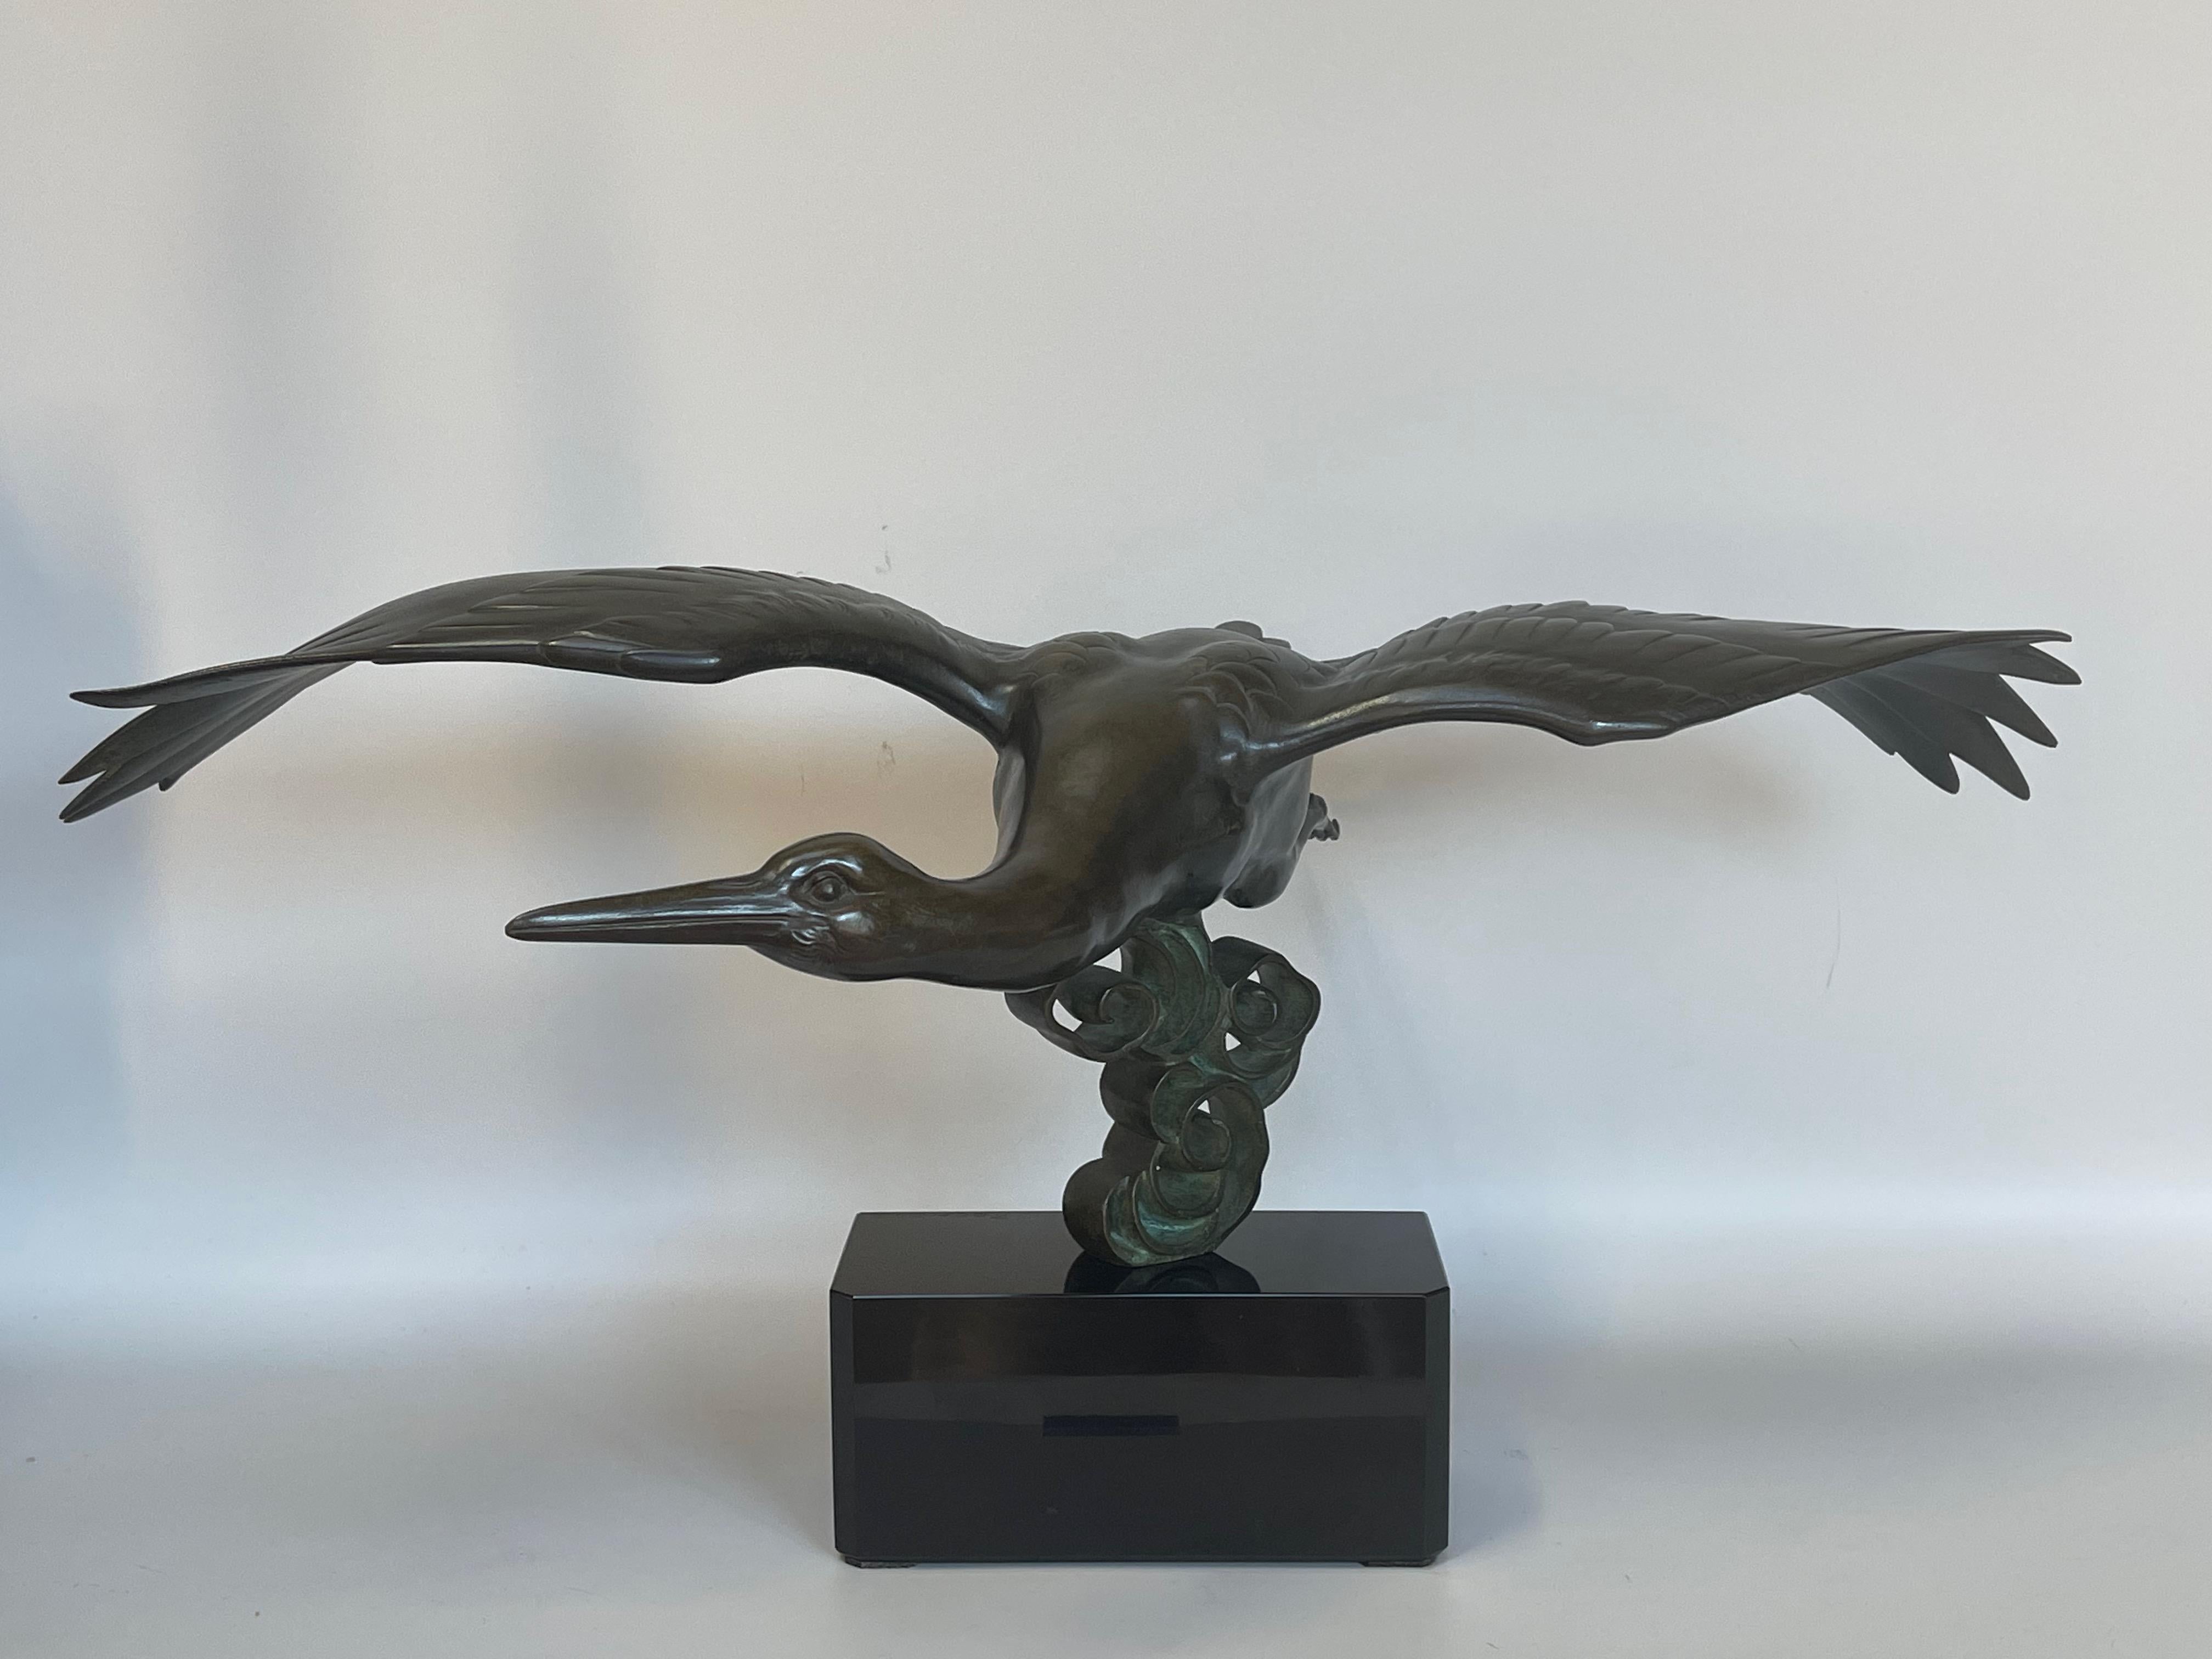 Ireneé Rochard Art Deco bronze representing the flight of a bronze stork with green patina on a black marble base.
In very good shape. Stamped I Rochard on the base.

Measures: height: 33cm
width: 66cm
depth: 40cm
Weight: 14kg

Irénée Rochard